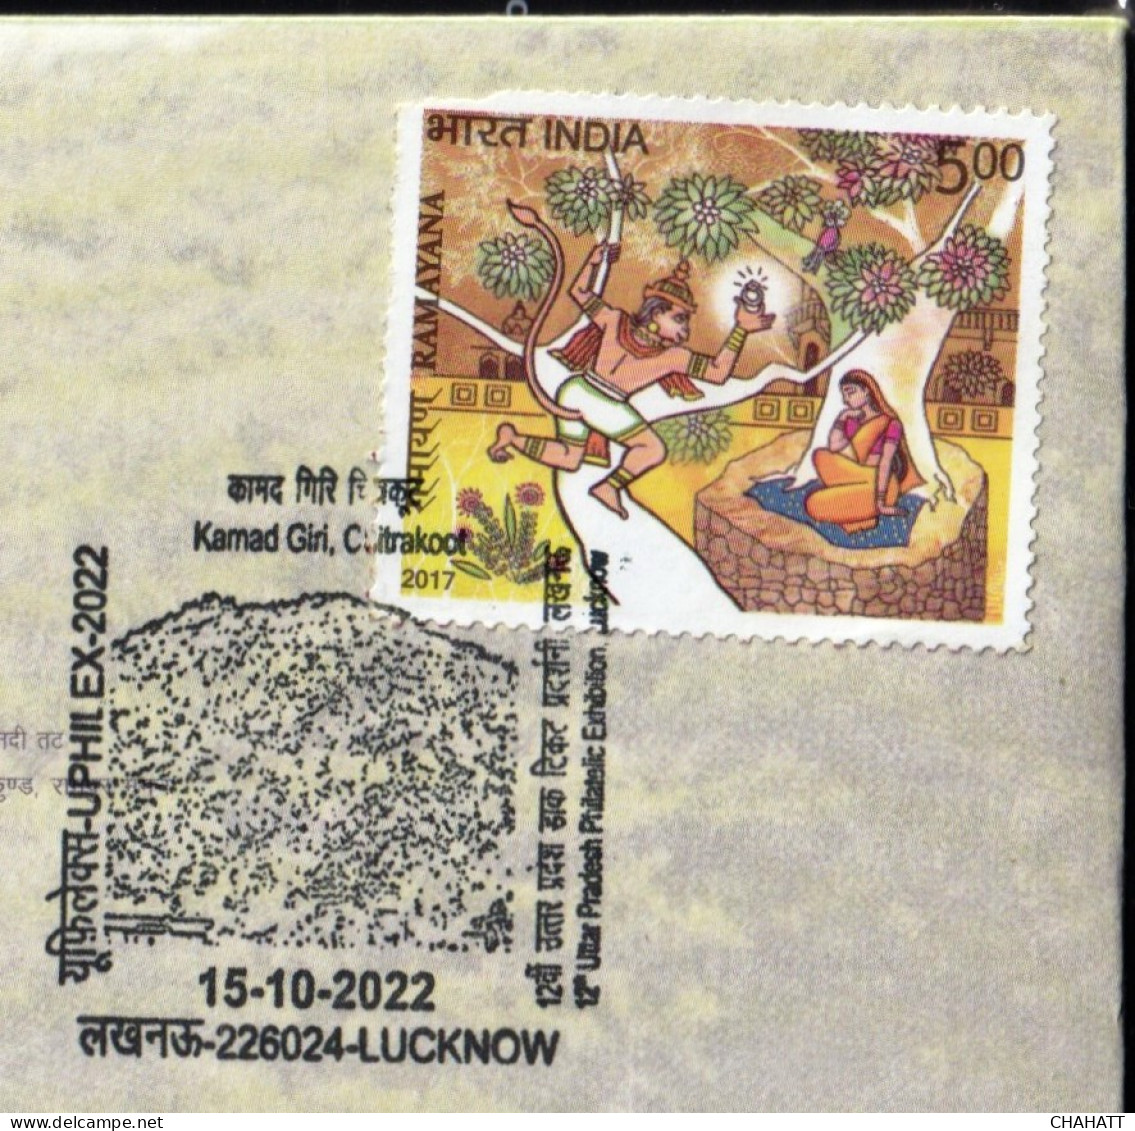 HINDUISM - RAMAYAN- KAMAD GIRI, FOREST HILLS OF CHITRAKOOT-PICTORIAL CANCELLATION - SPECIAL COVER - INDIA -2022- BX4-23 - Hinduismus